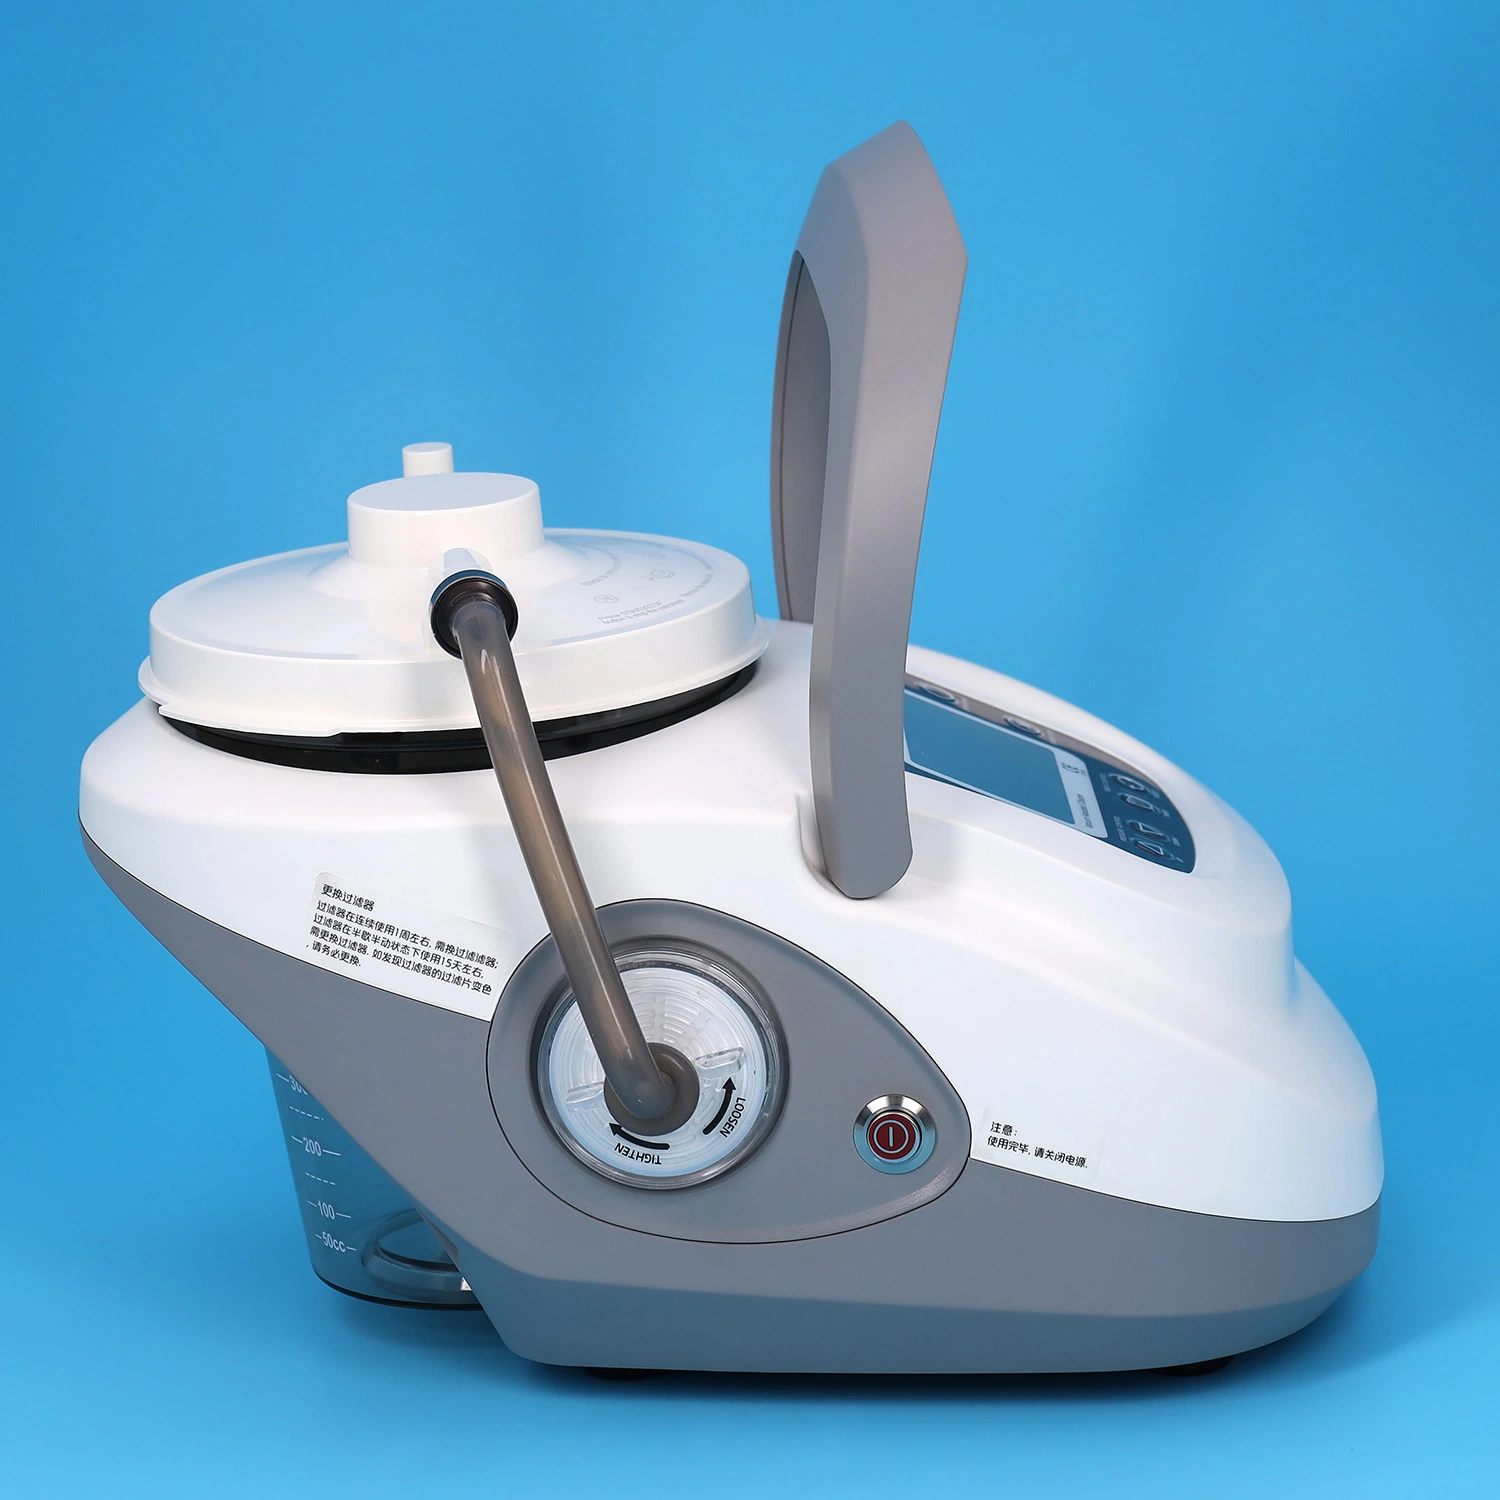 Therapy VAC/Npwt Equipment Negative Pressure Wound Treatment Machine for Wound Care